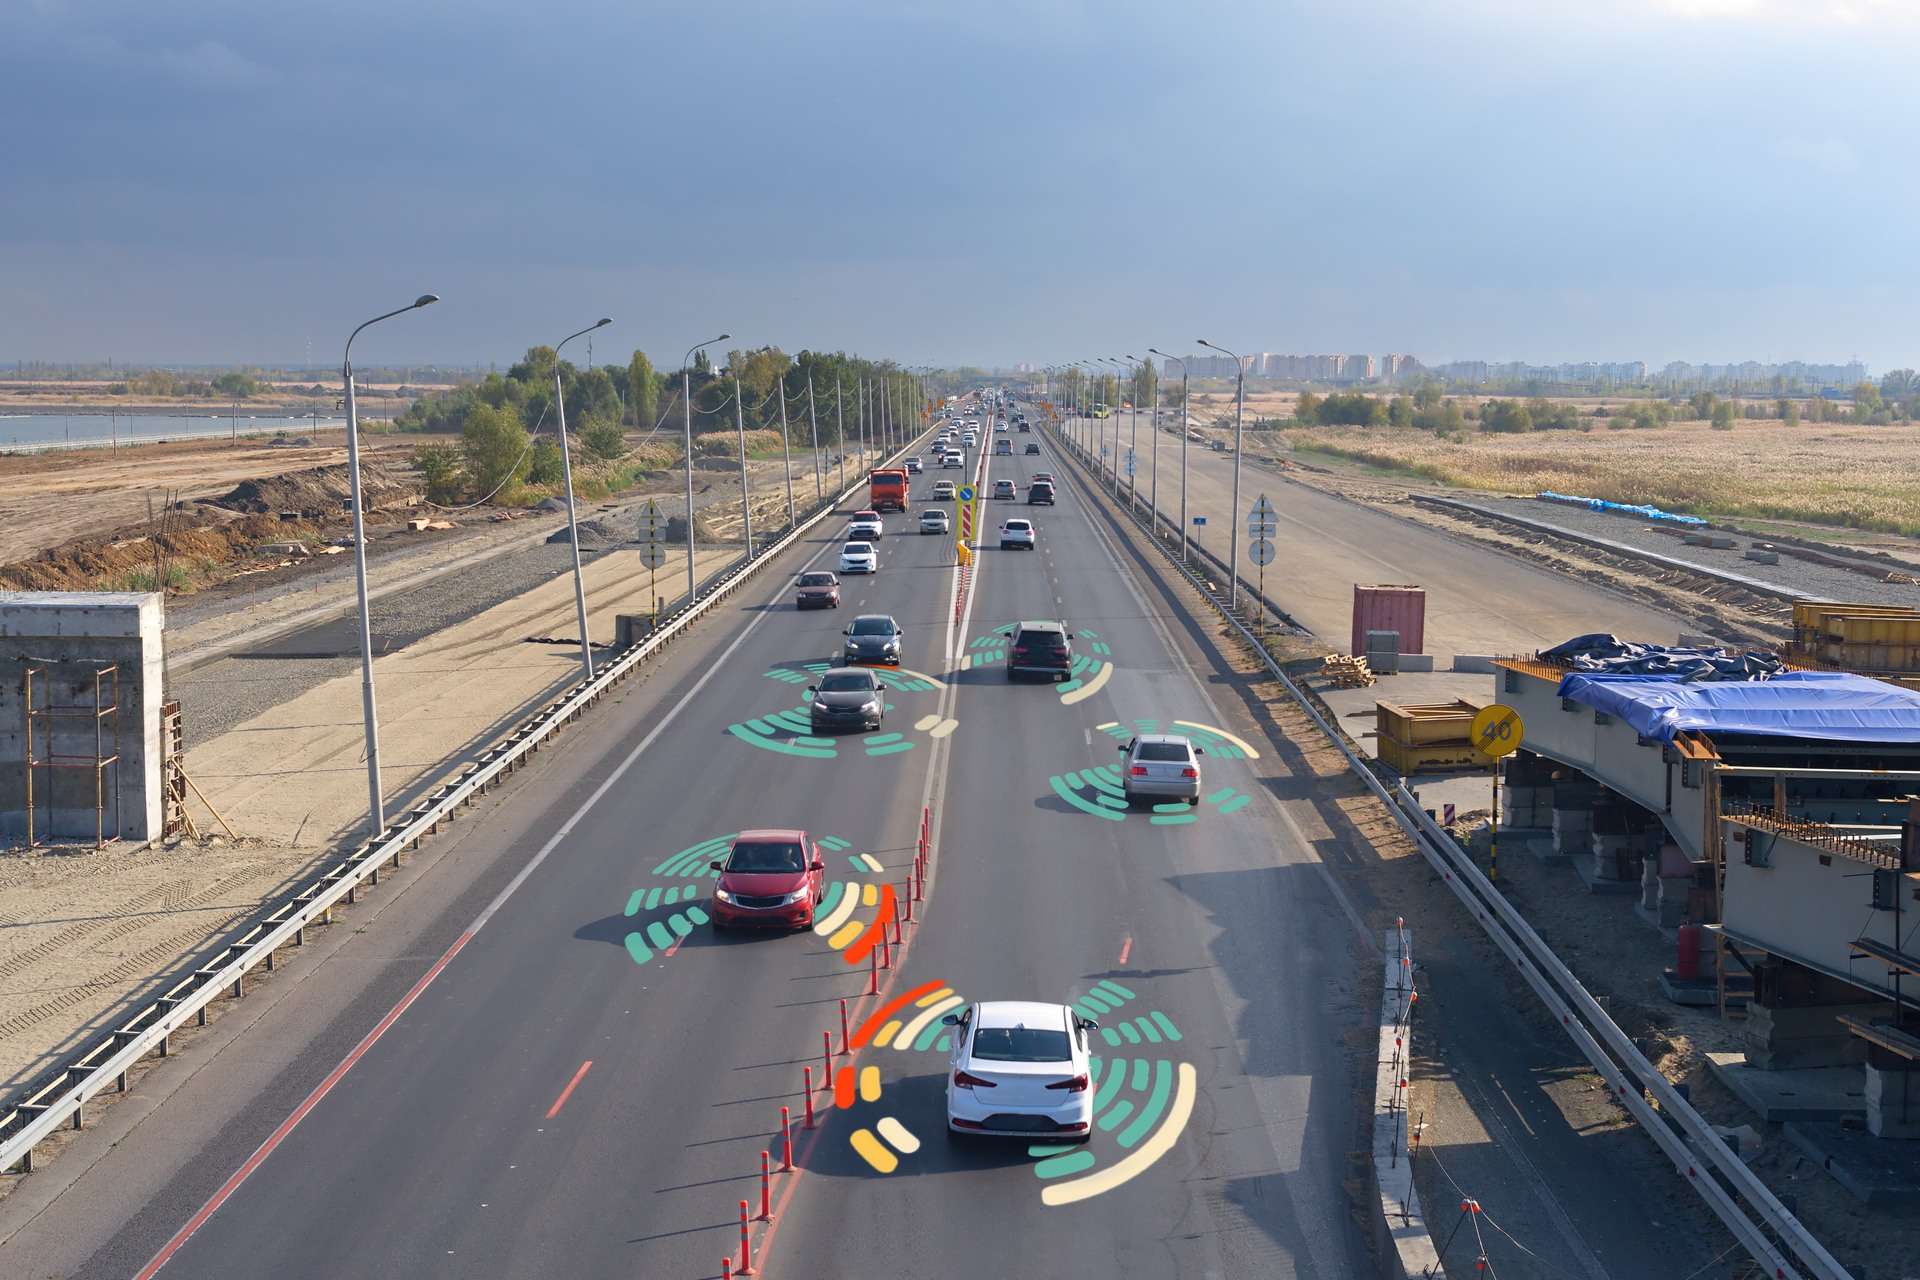 Smart roads: Improving urban mobility through road technology